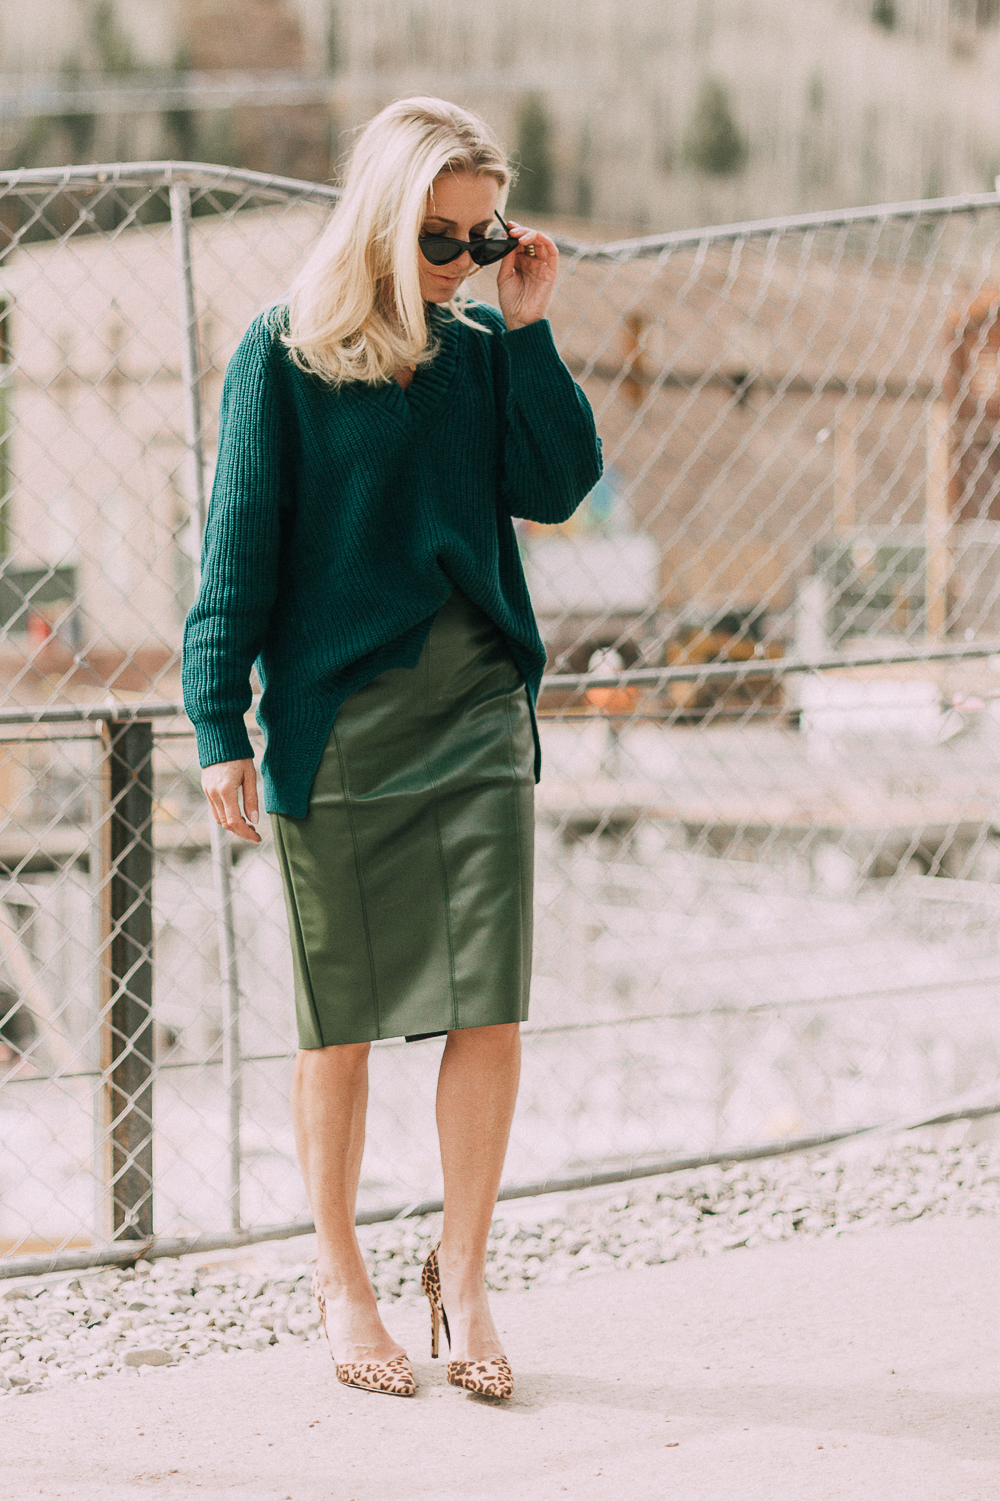 Olive green and green outfit combination